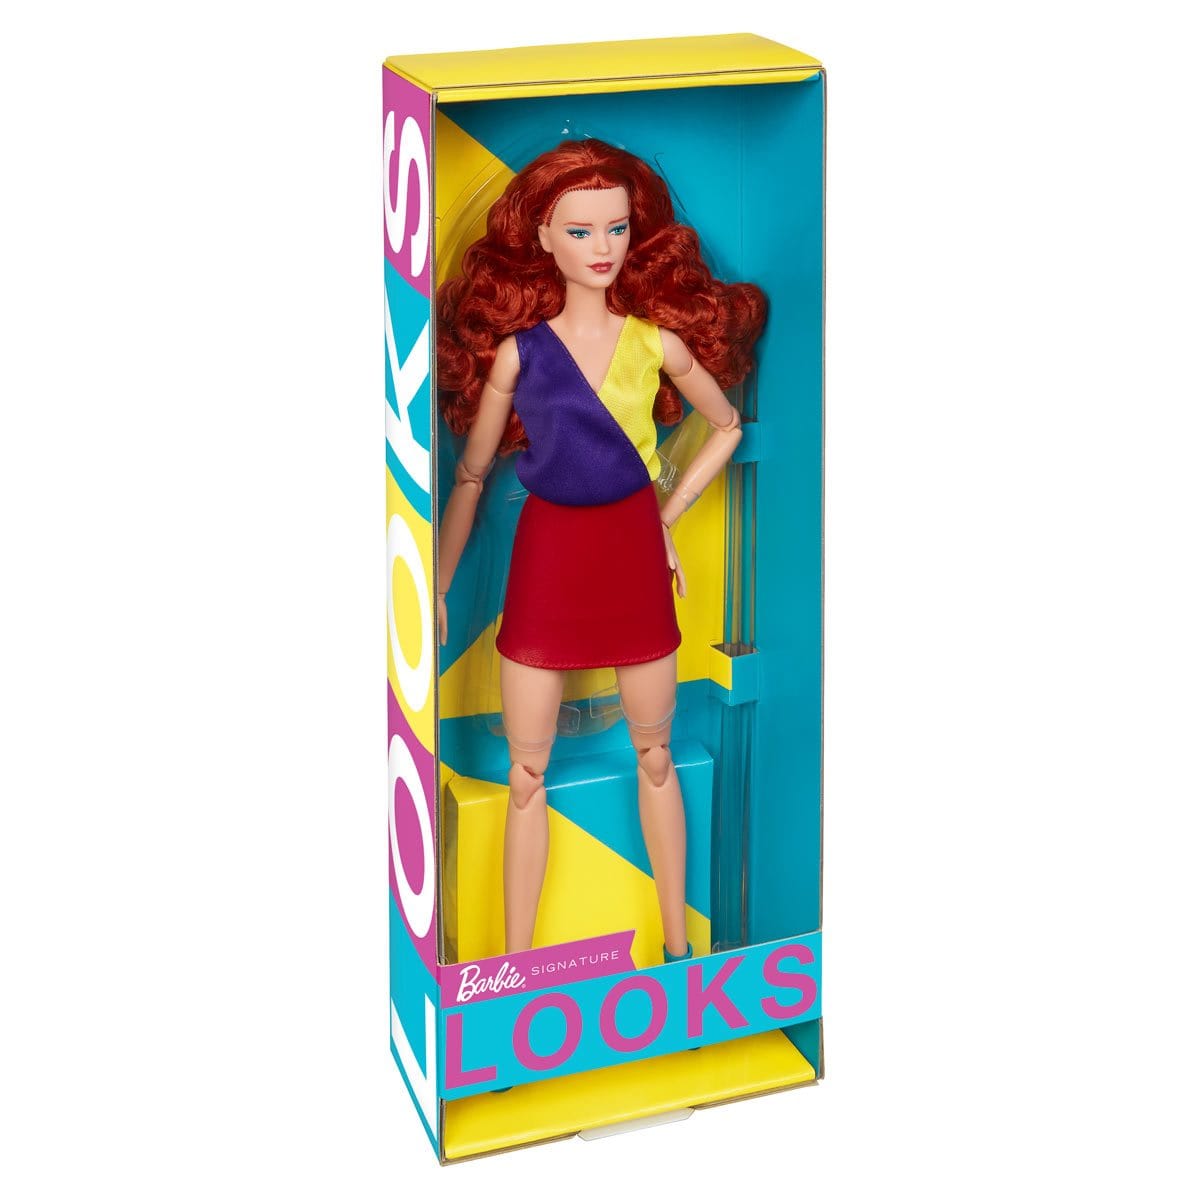 Barbie Looks Doll_13 with Red Hair - in display box